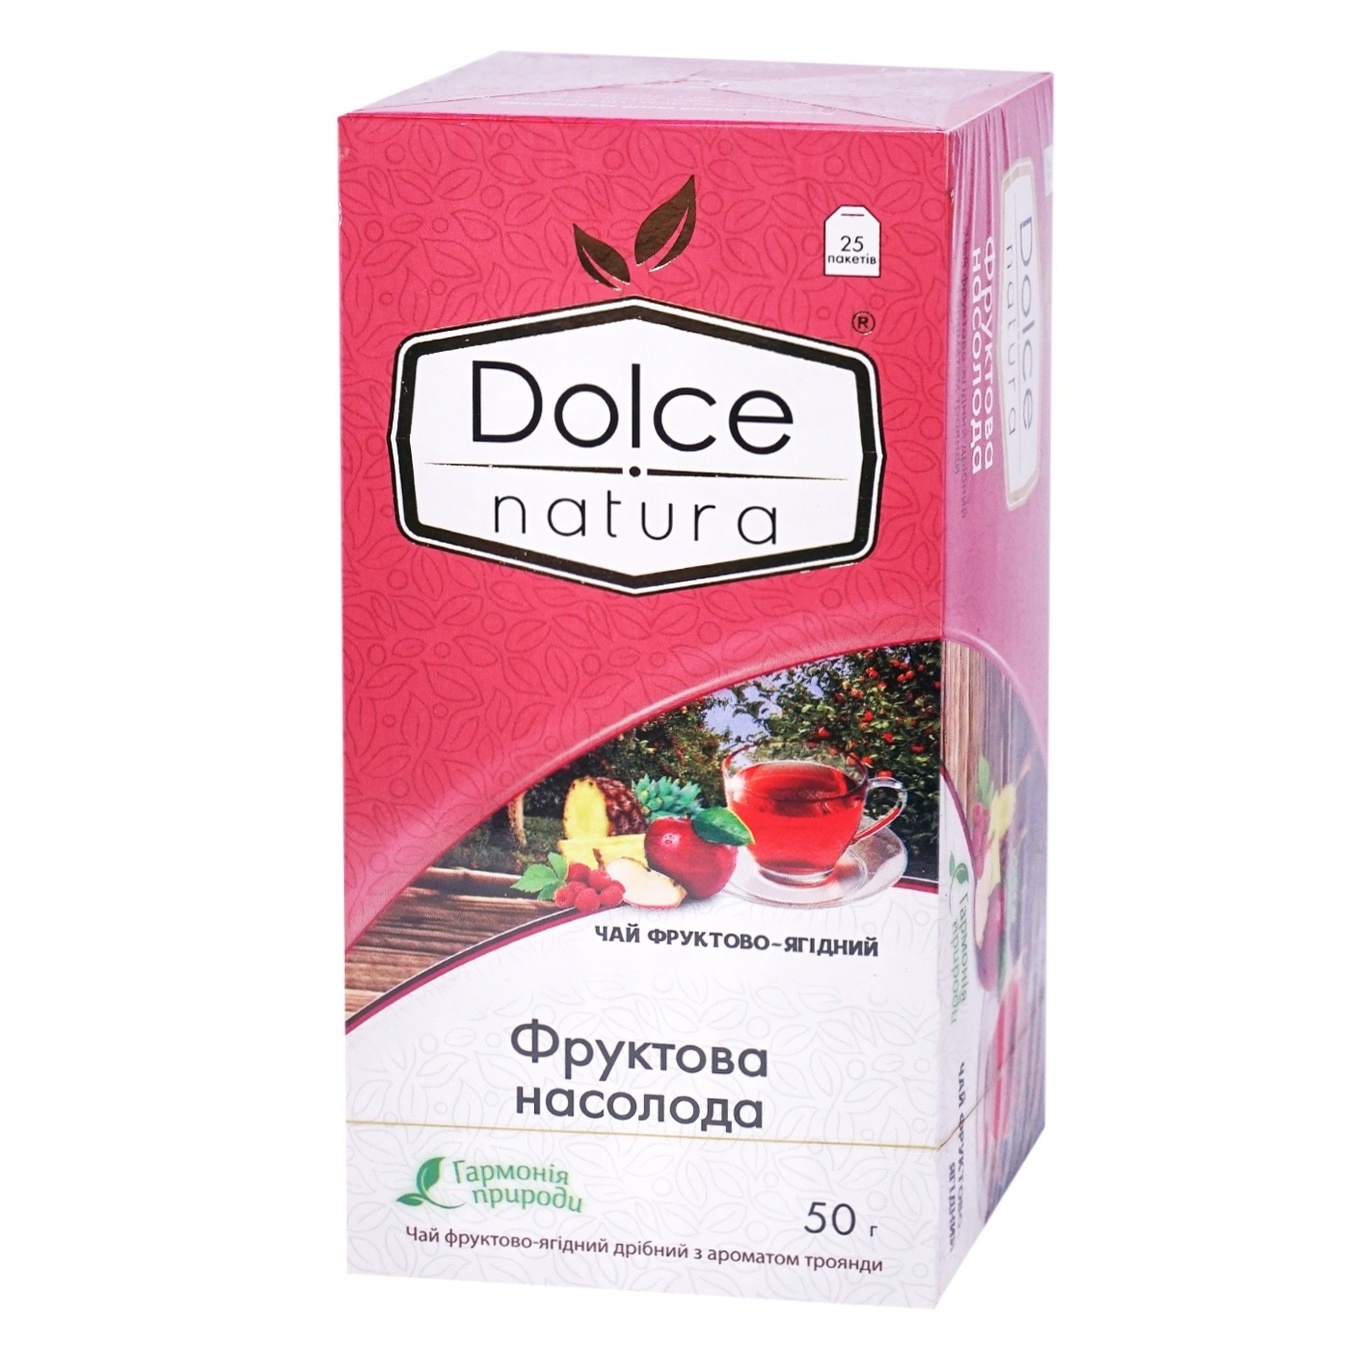 Dolce Natura fruit and berry tea Fruit delight 25*2g